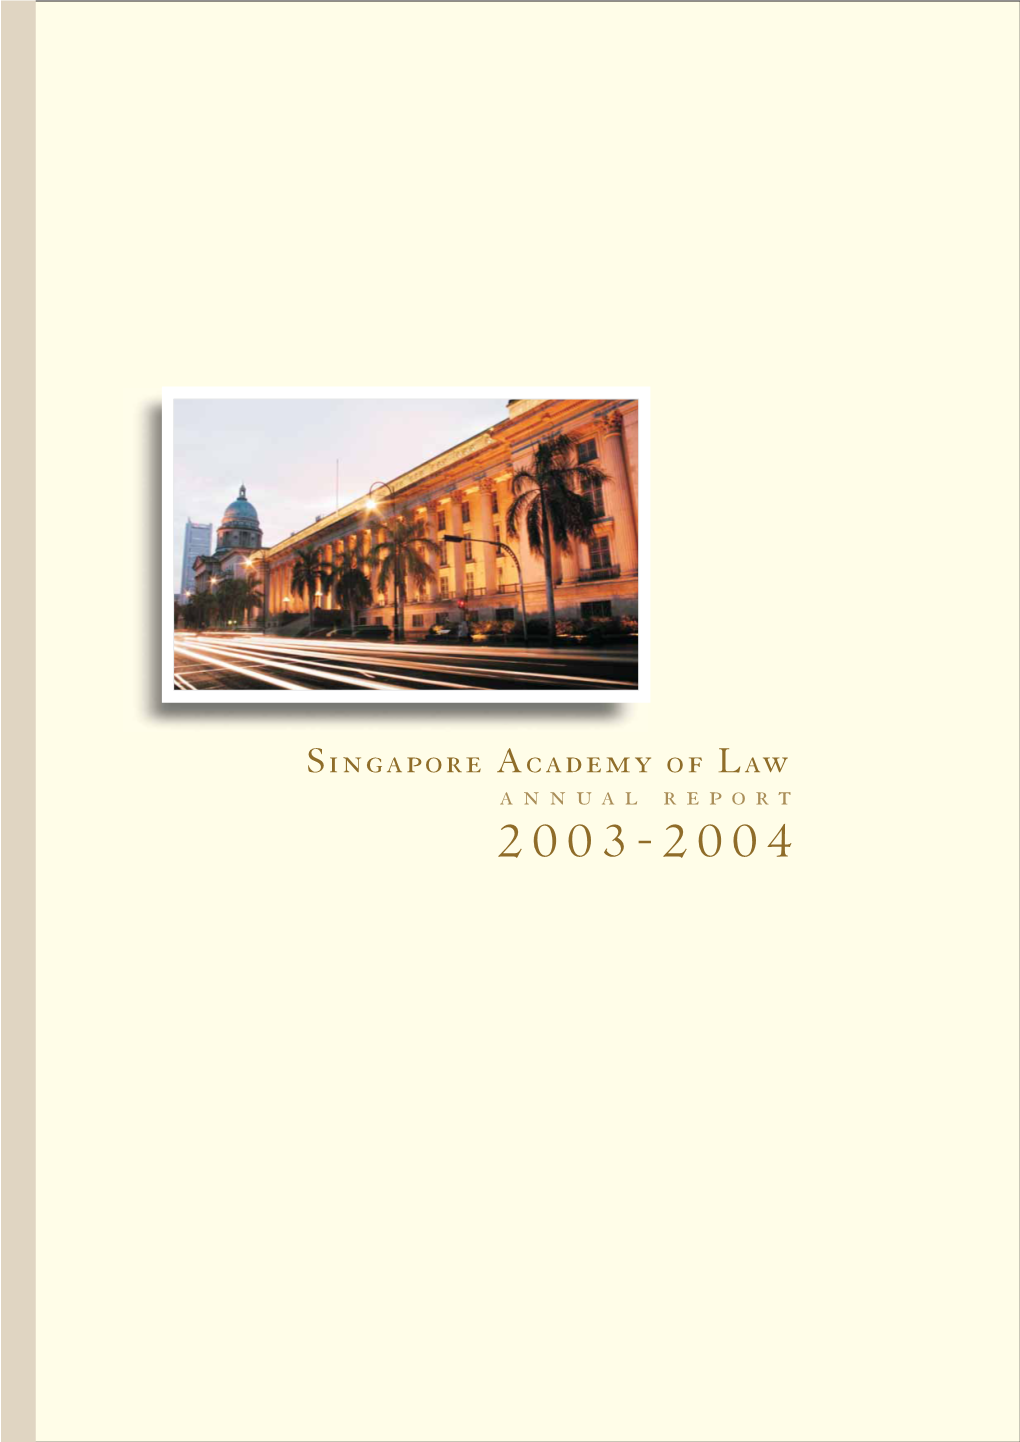 Singapore Academy of Law Annual Report 2003/2004